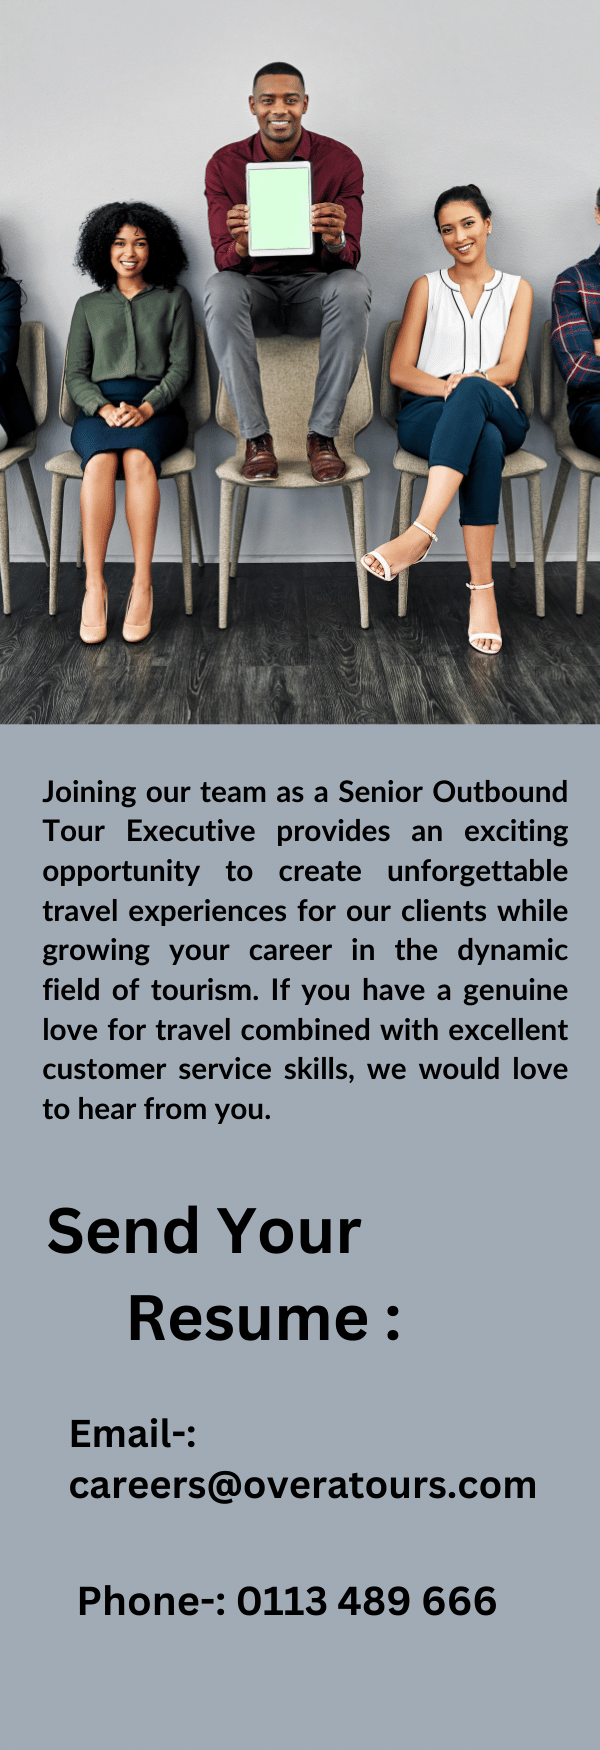 career advancement opportunities for outbound tour executives